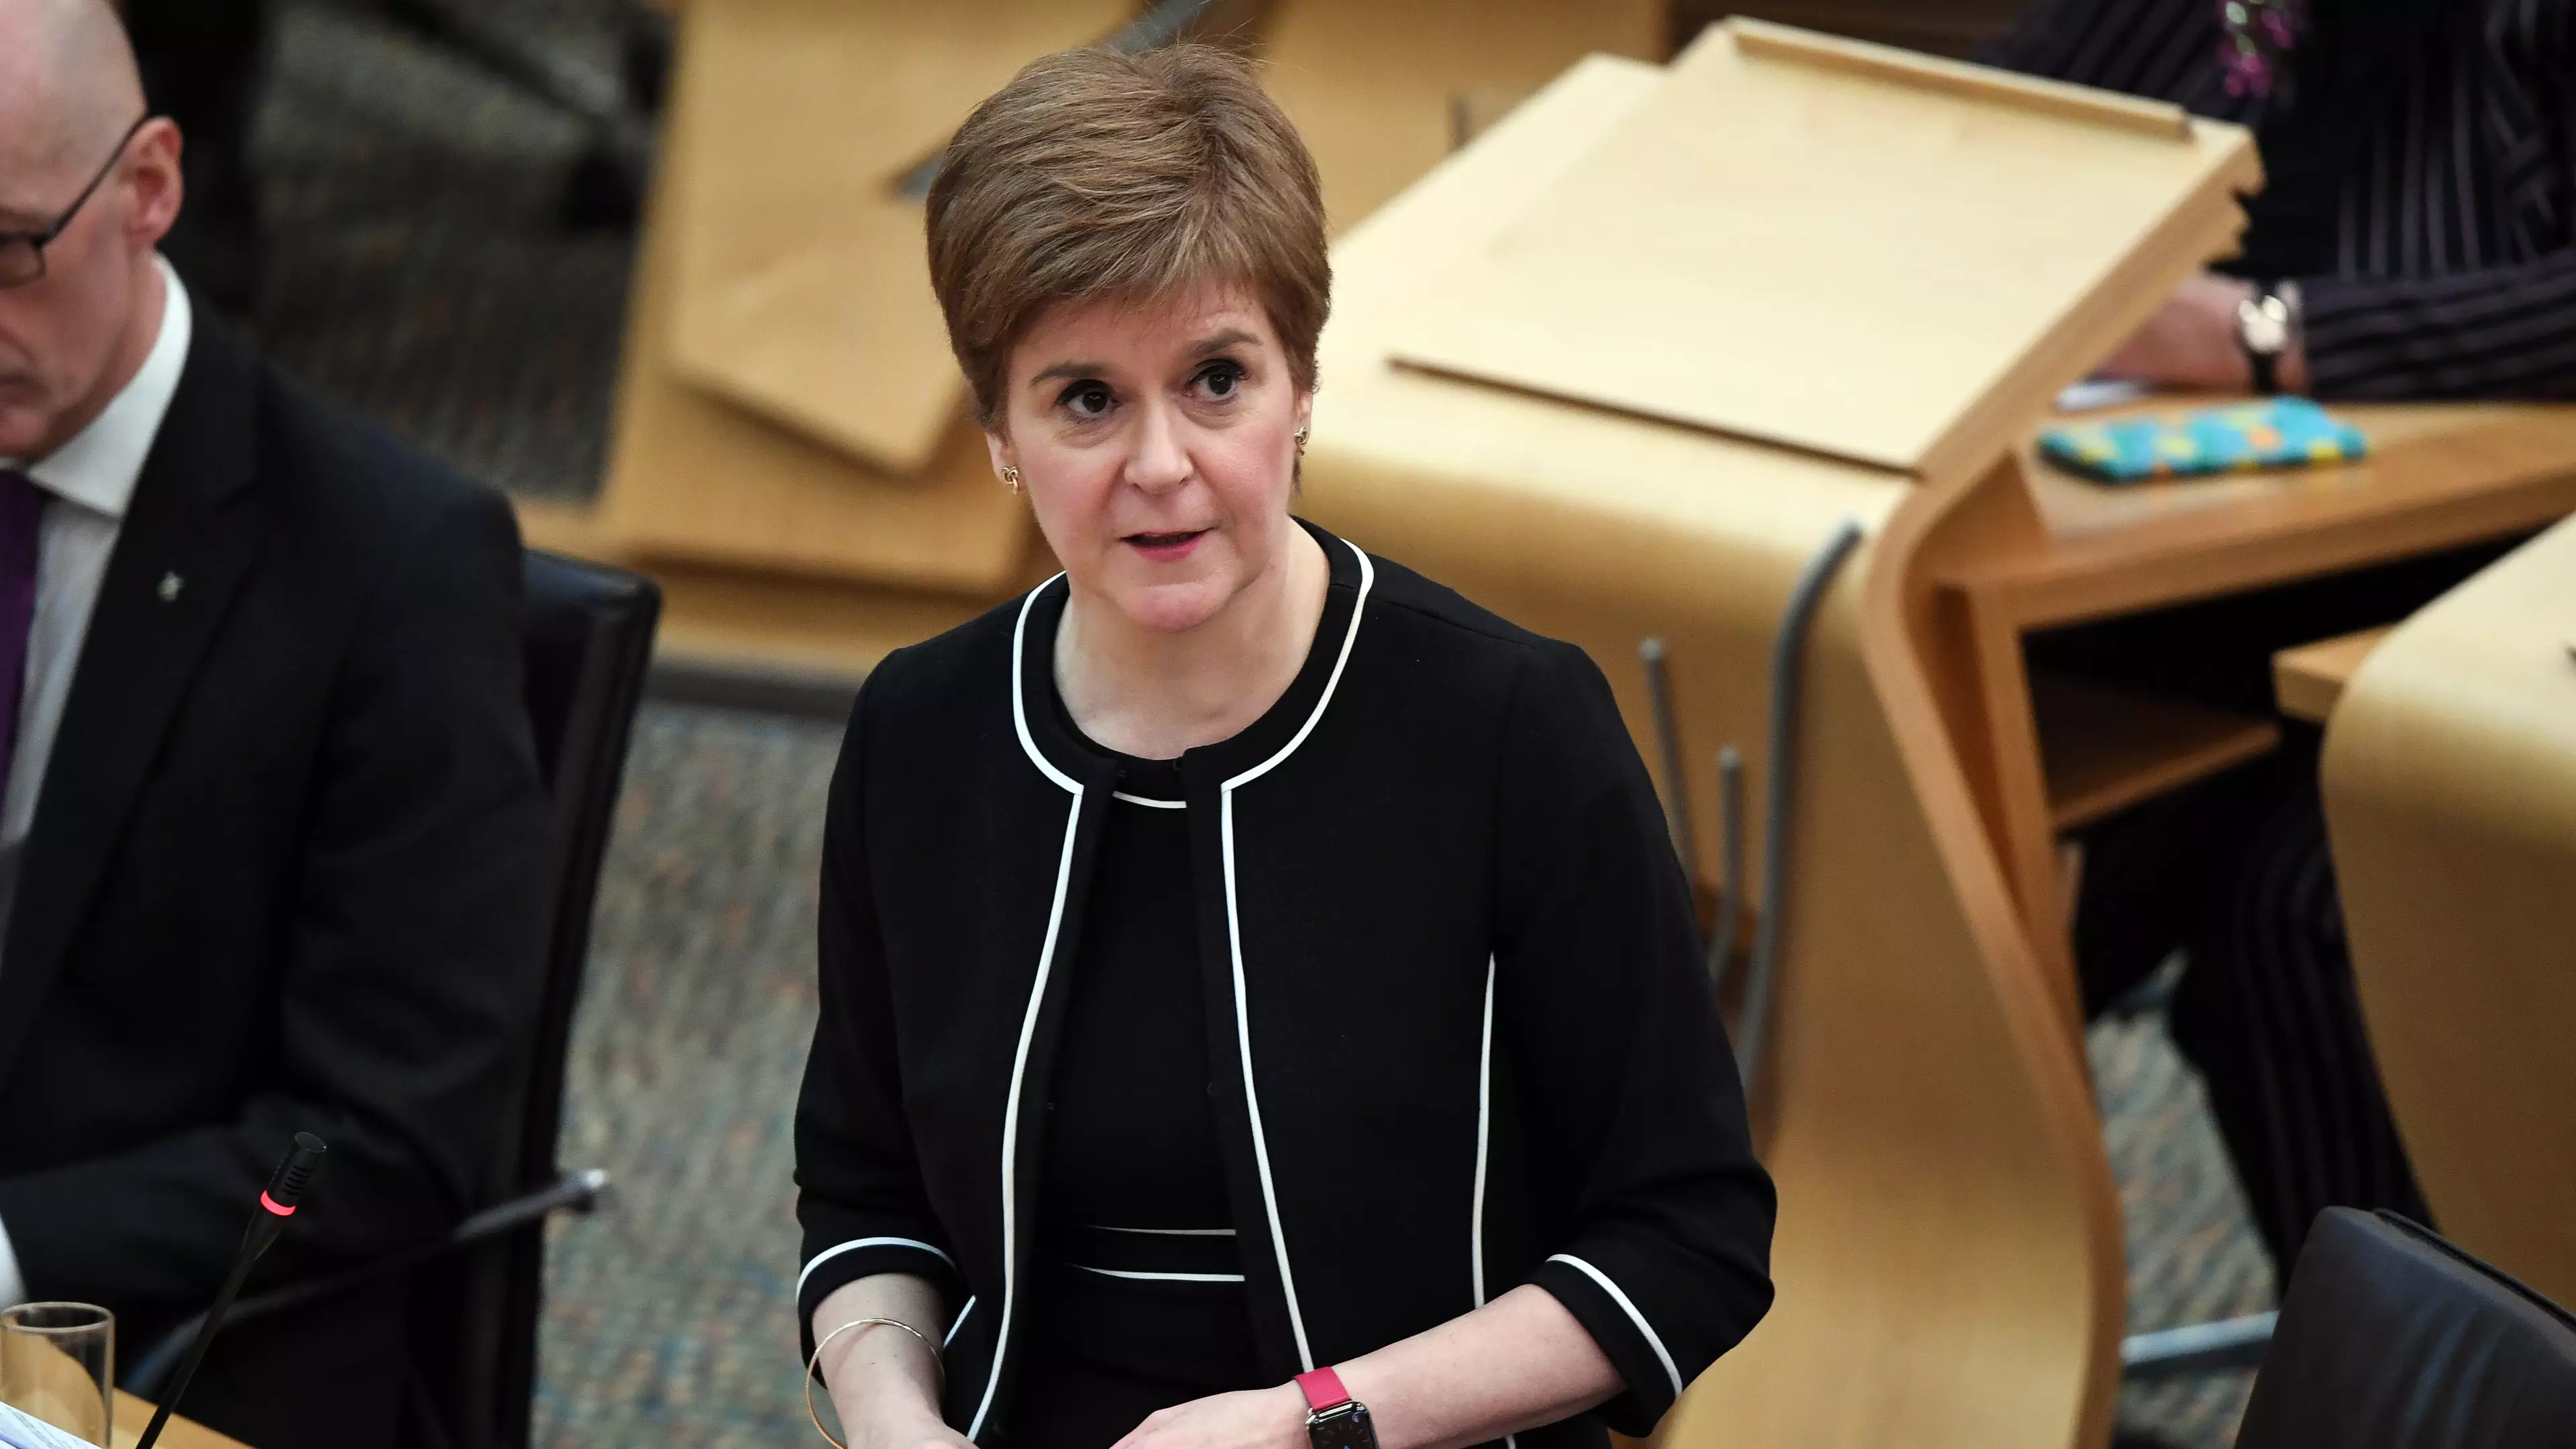 Nicola Sturgeon Announces Ban On Indoor Alcohol Sales In Scottish Hospitality Venues